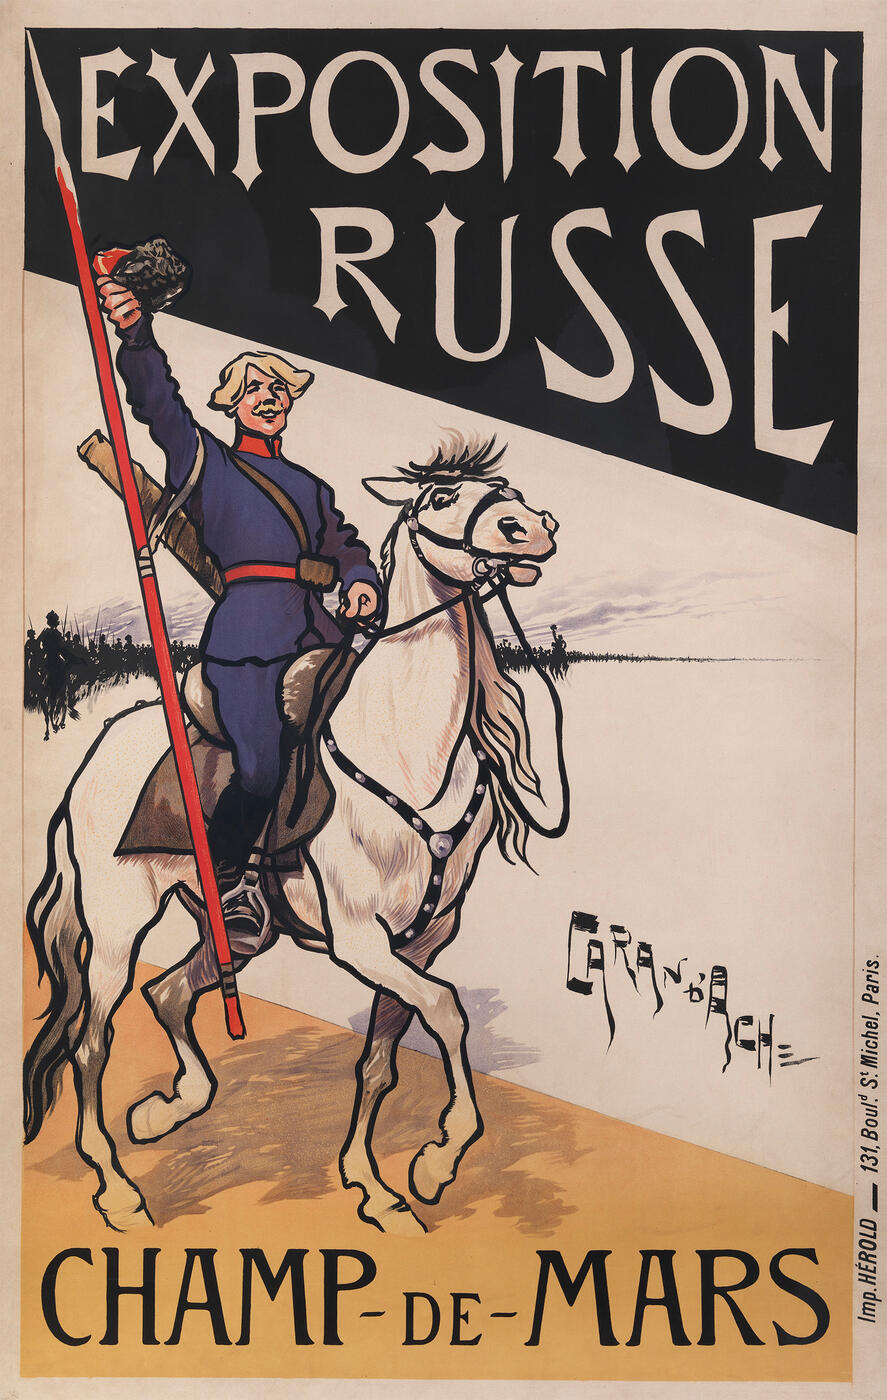 A Poster “Exposition russe”